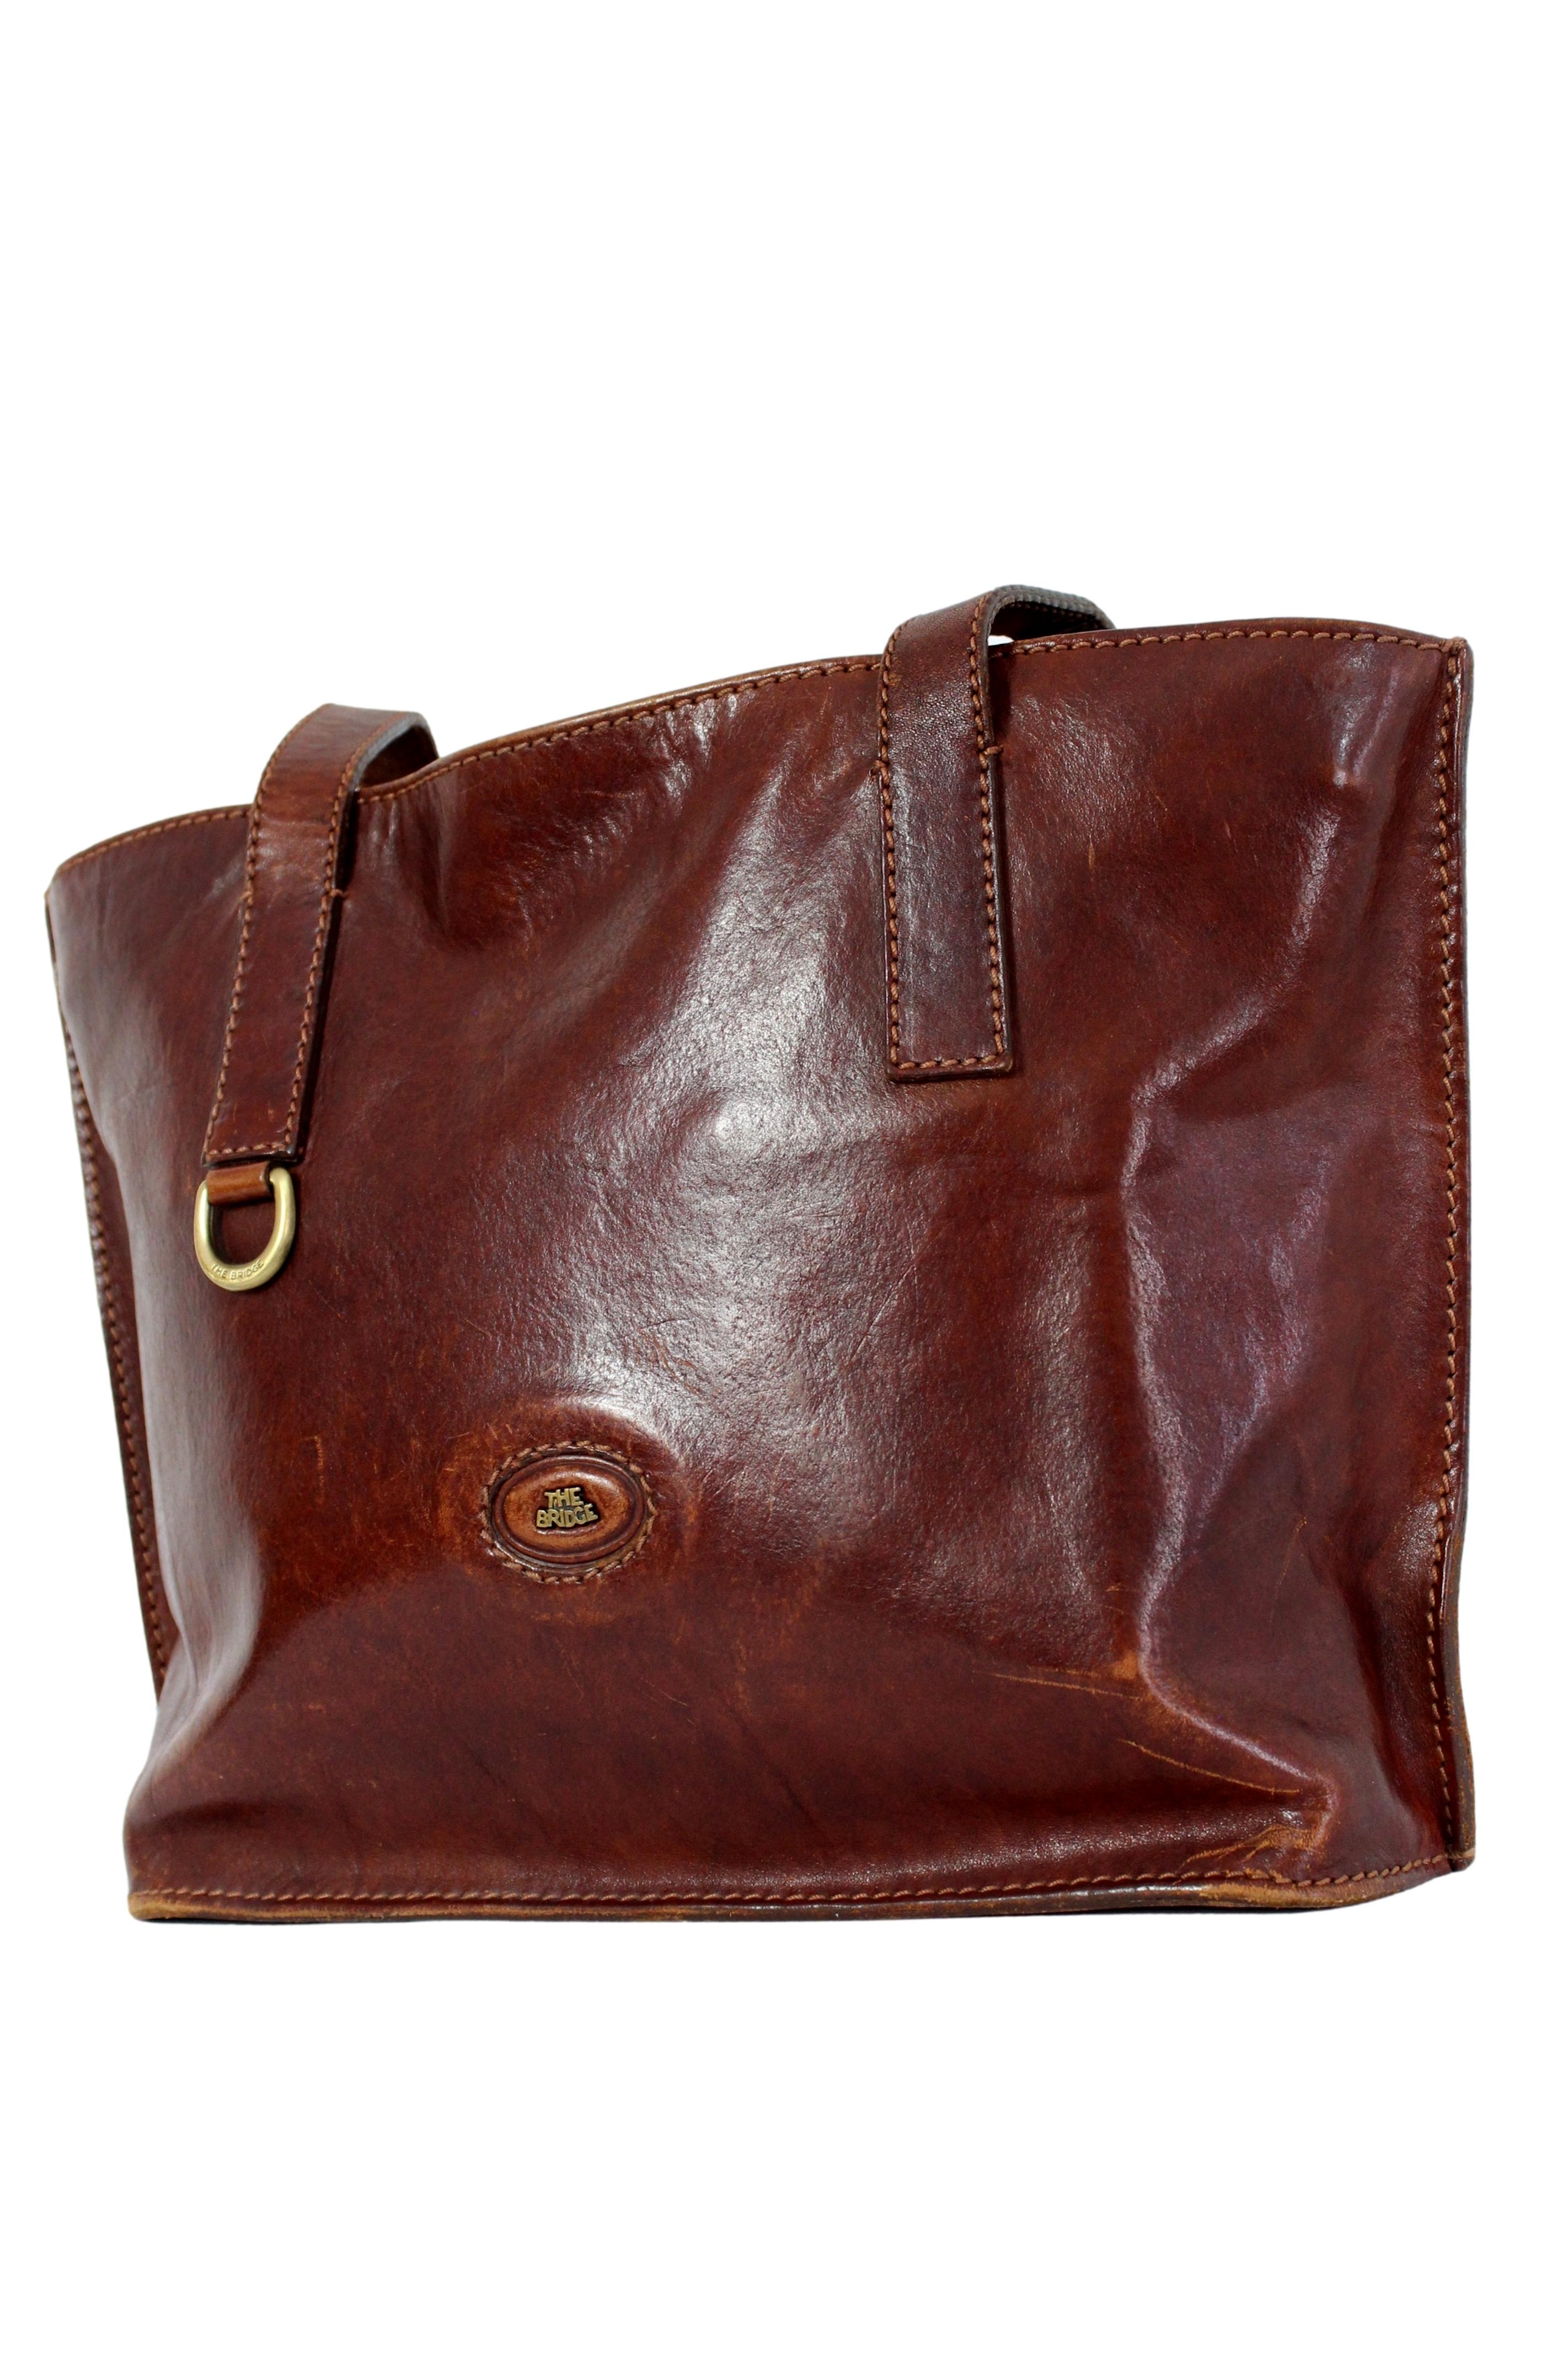 The Bridge Brown Leather Shoulder Shopper Bag In Good Condition In Brindisi, Bt